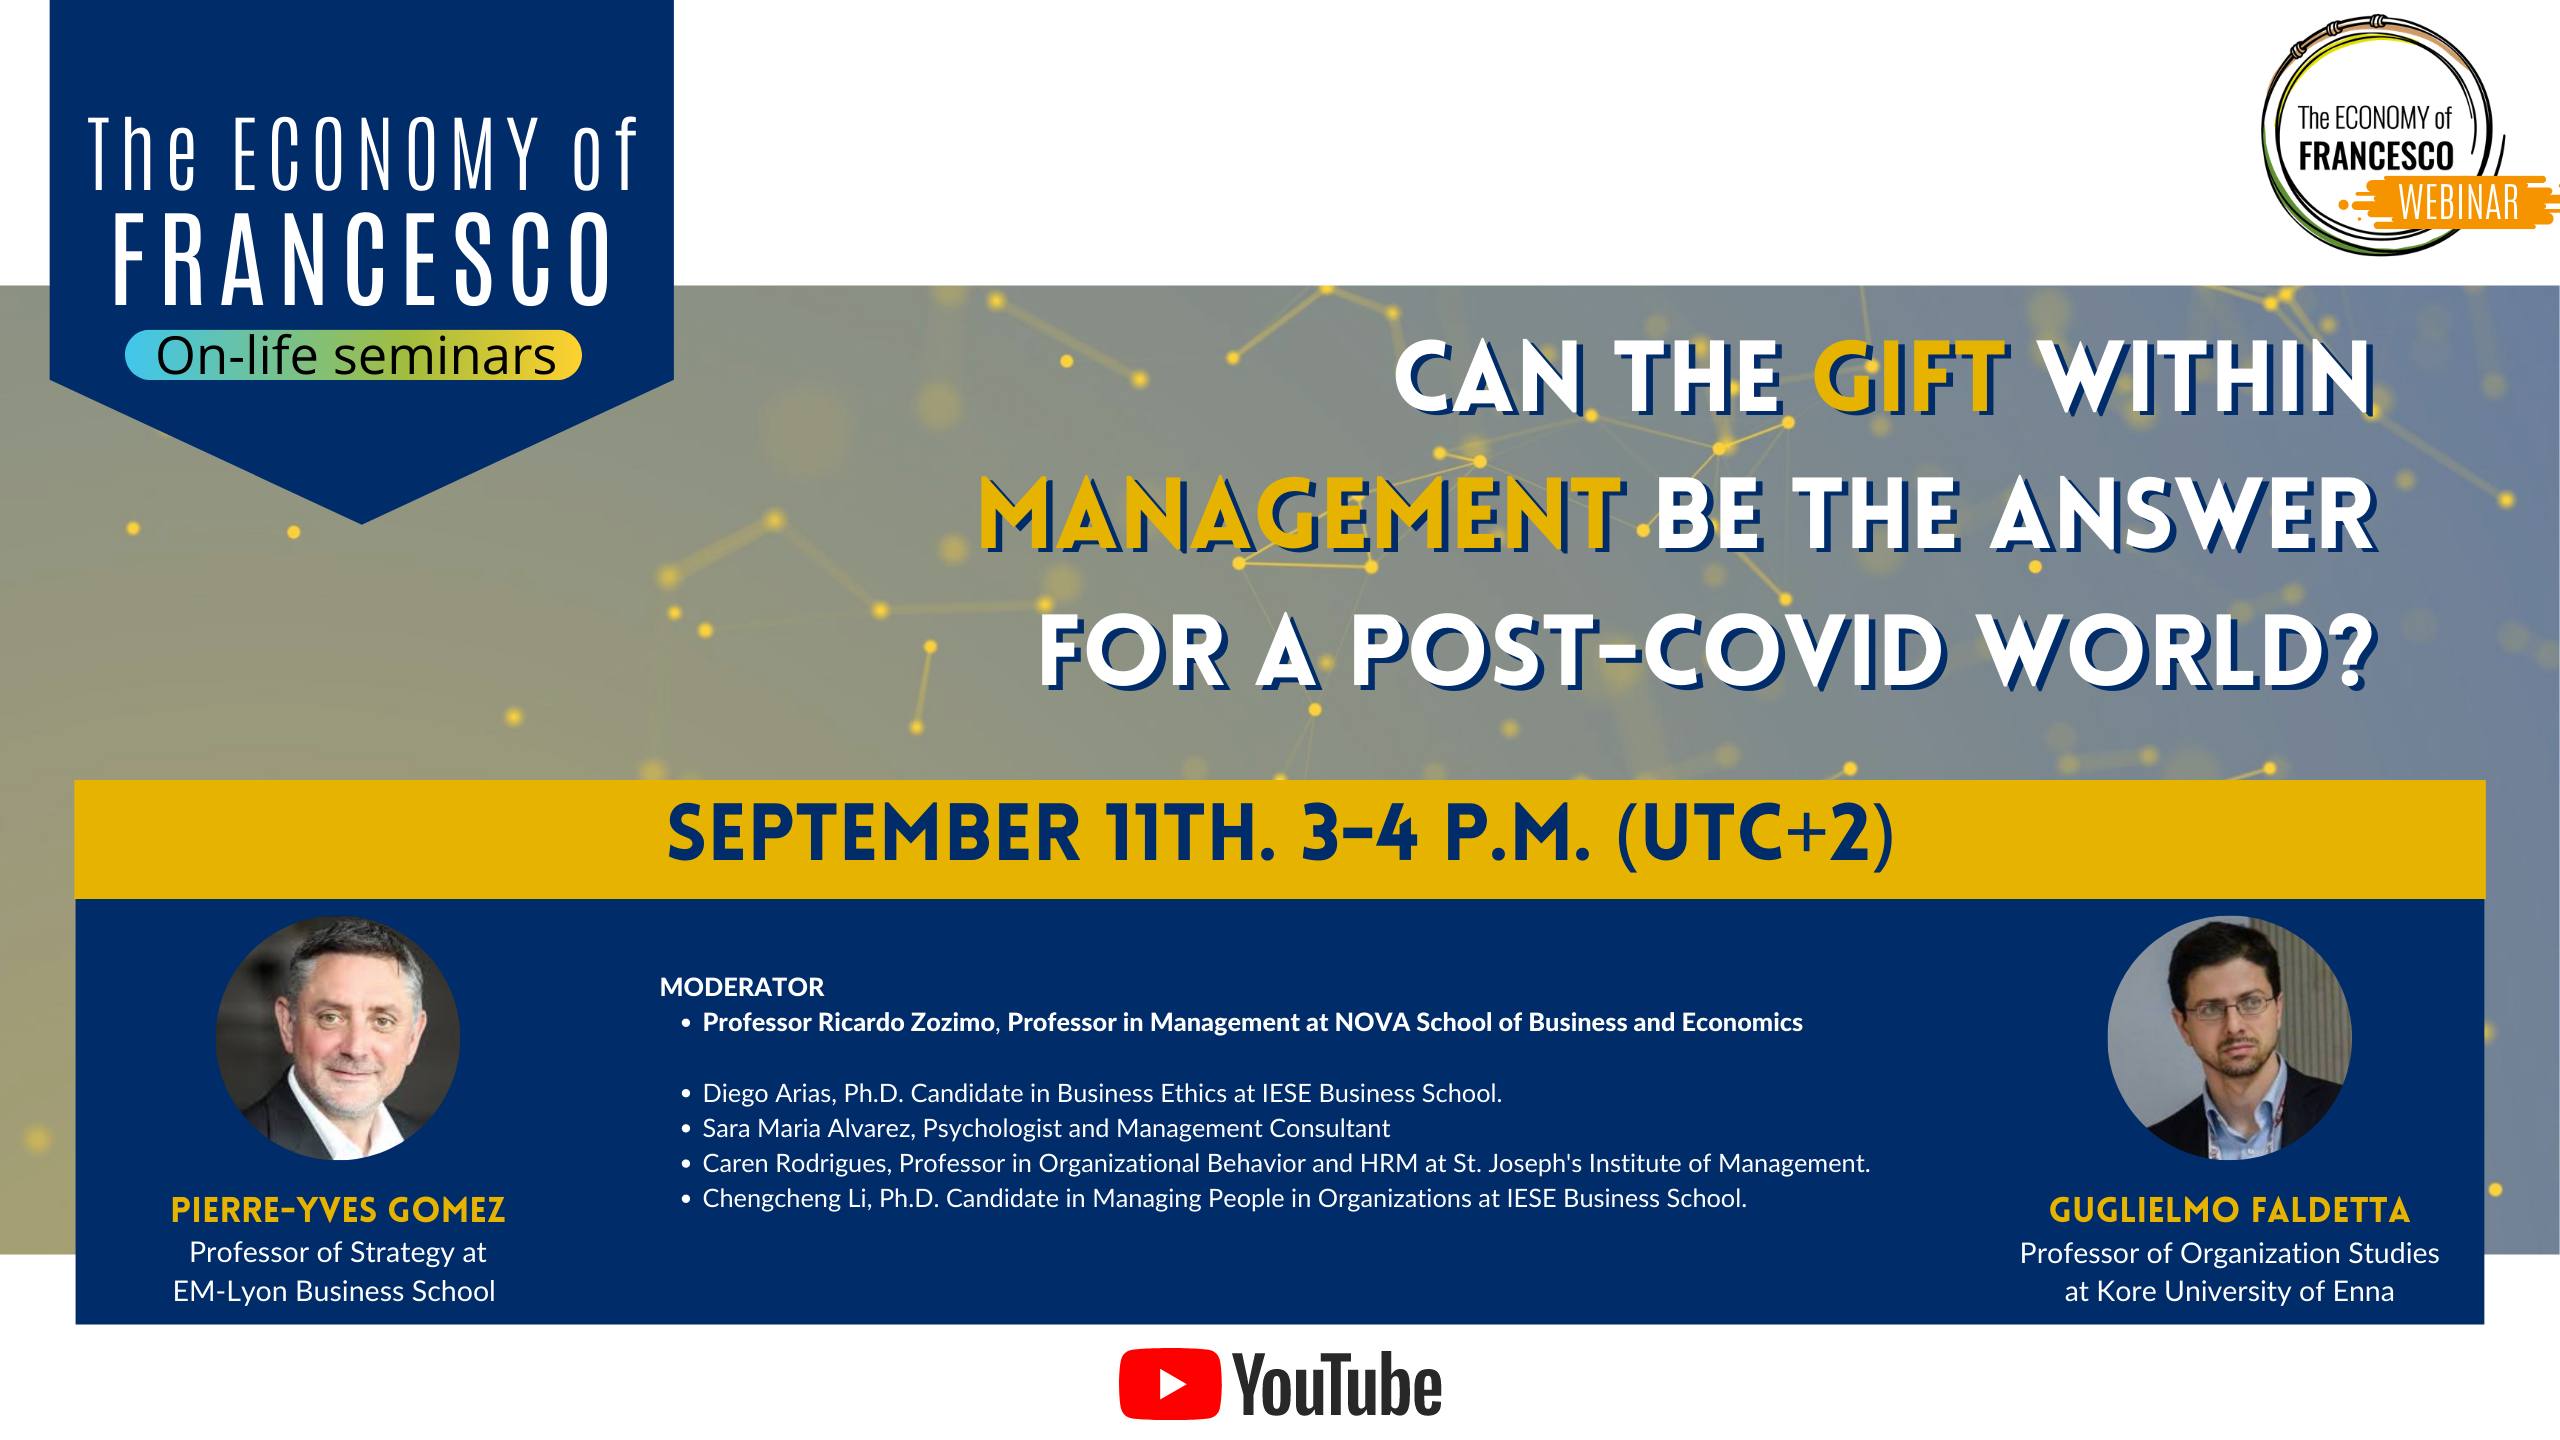 #EoF On-life Seminar: Can the gift within management be the answer for a Post-Covid world?